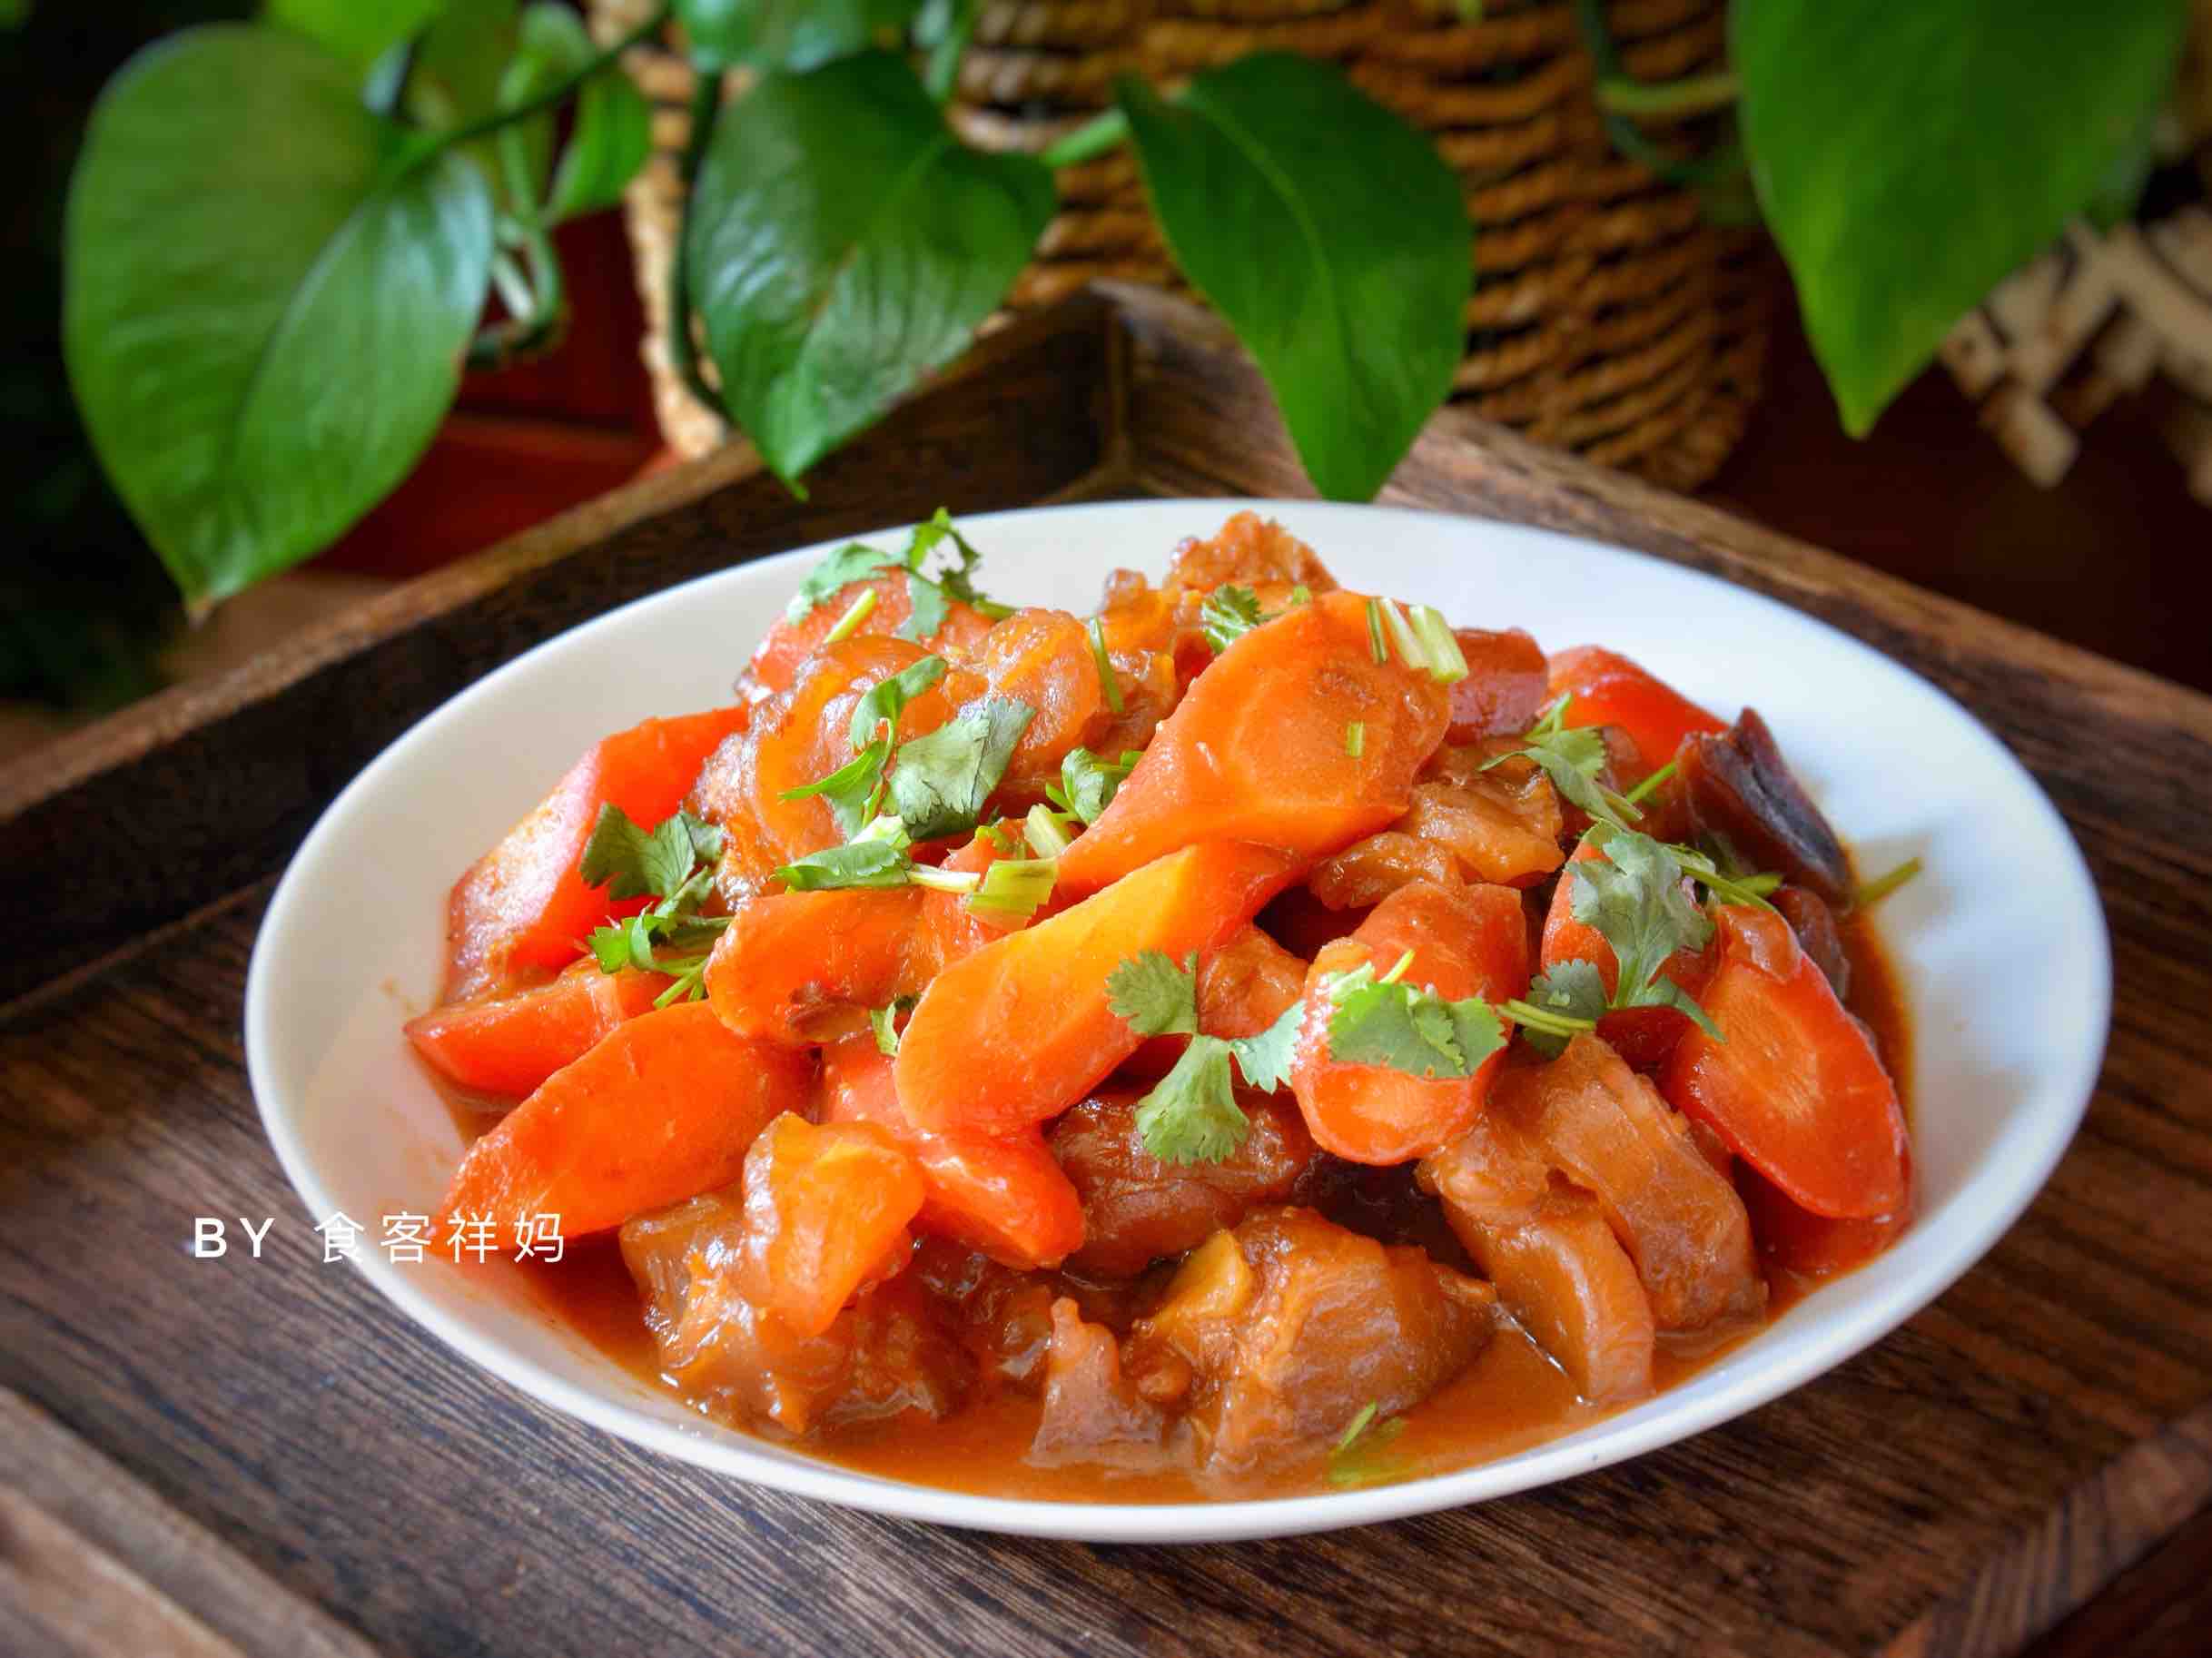 Beef Tendon Roasted Carrots recipe